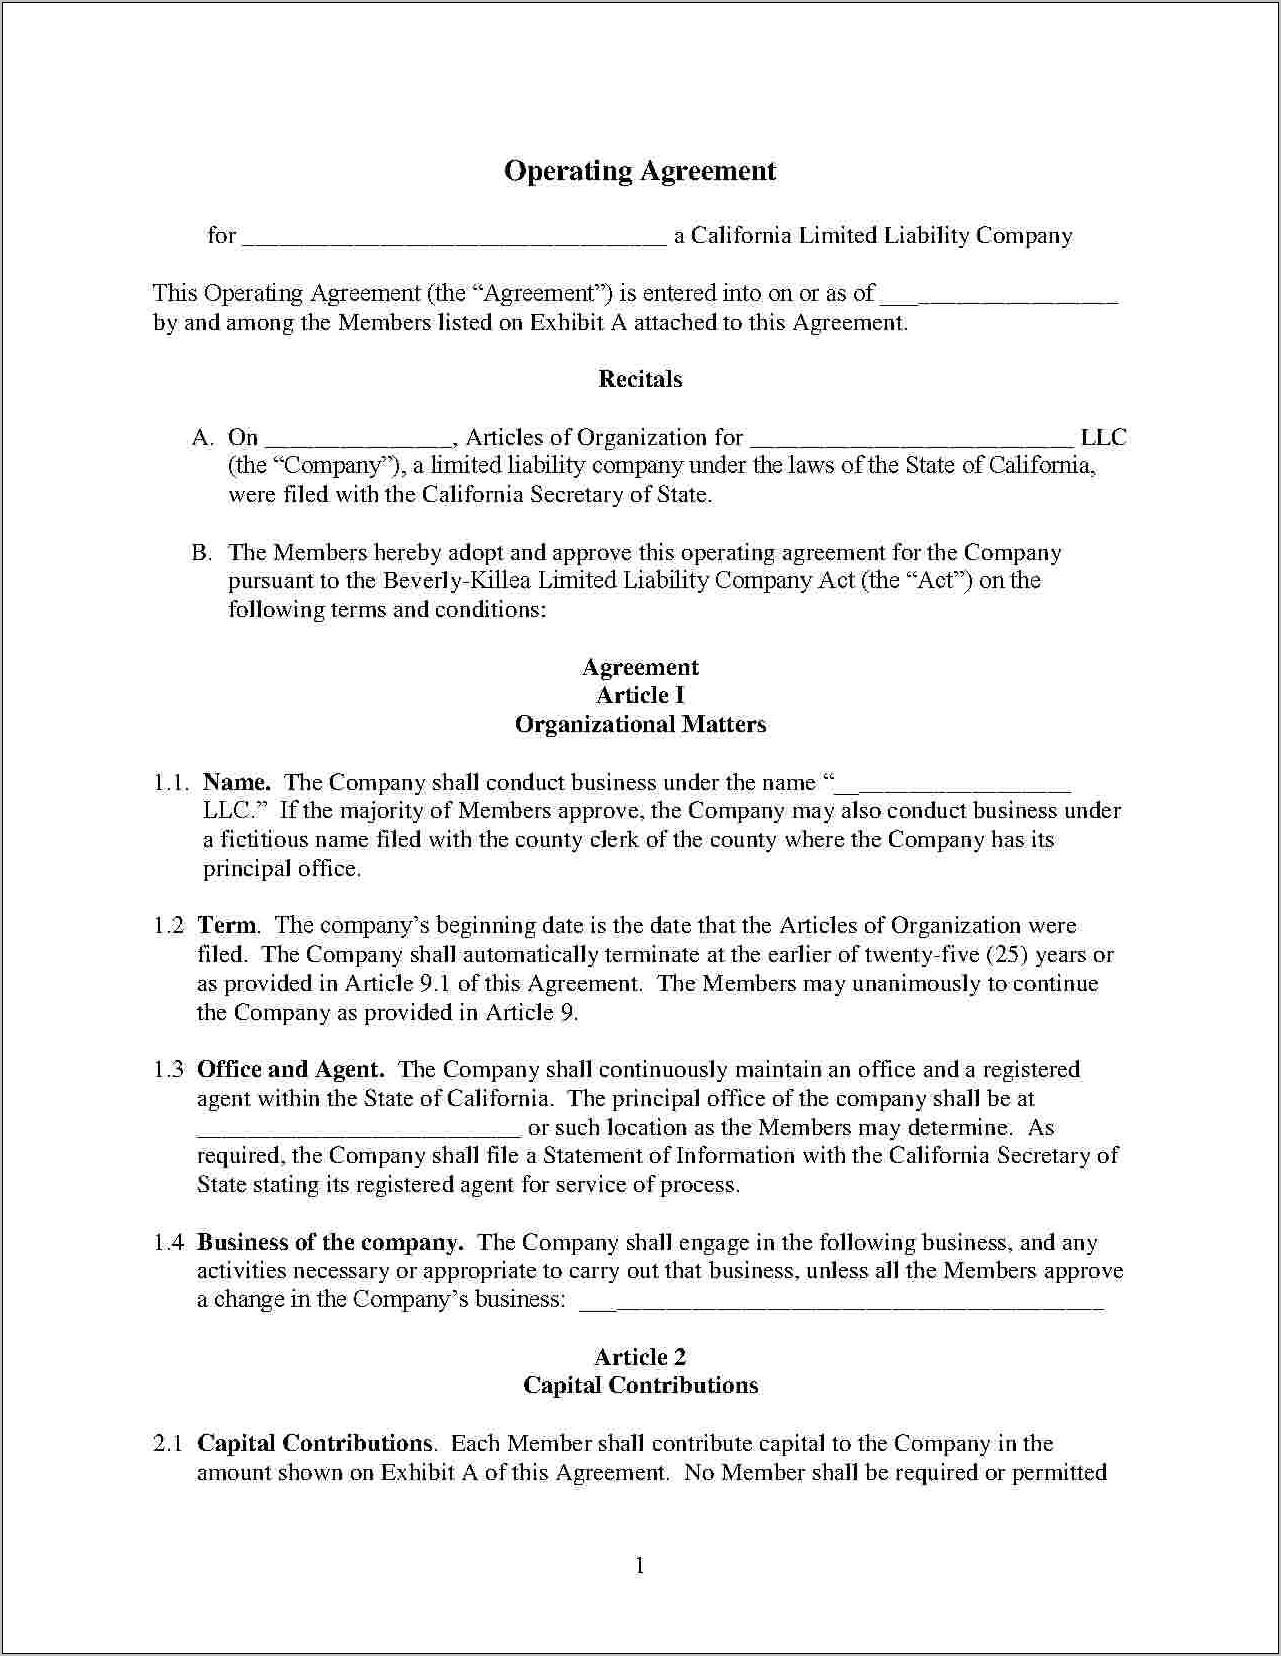 Template For Amendment To Articles Of Incorporation